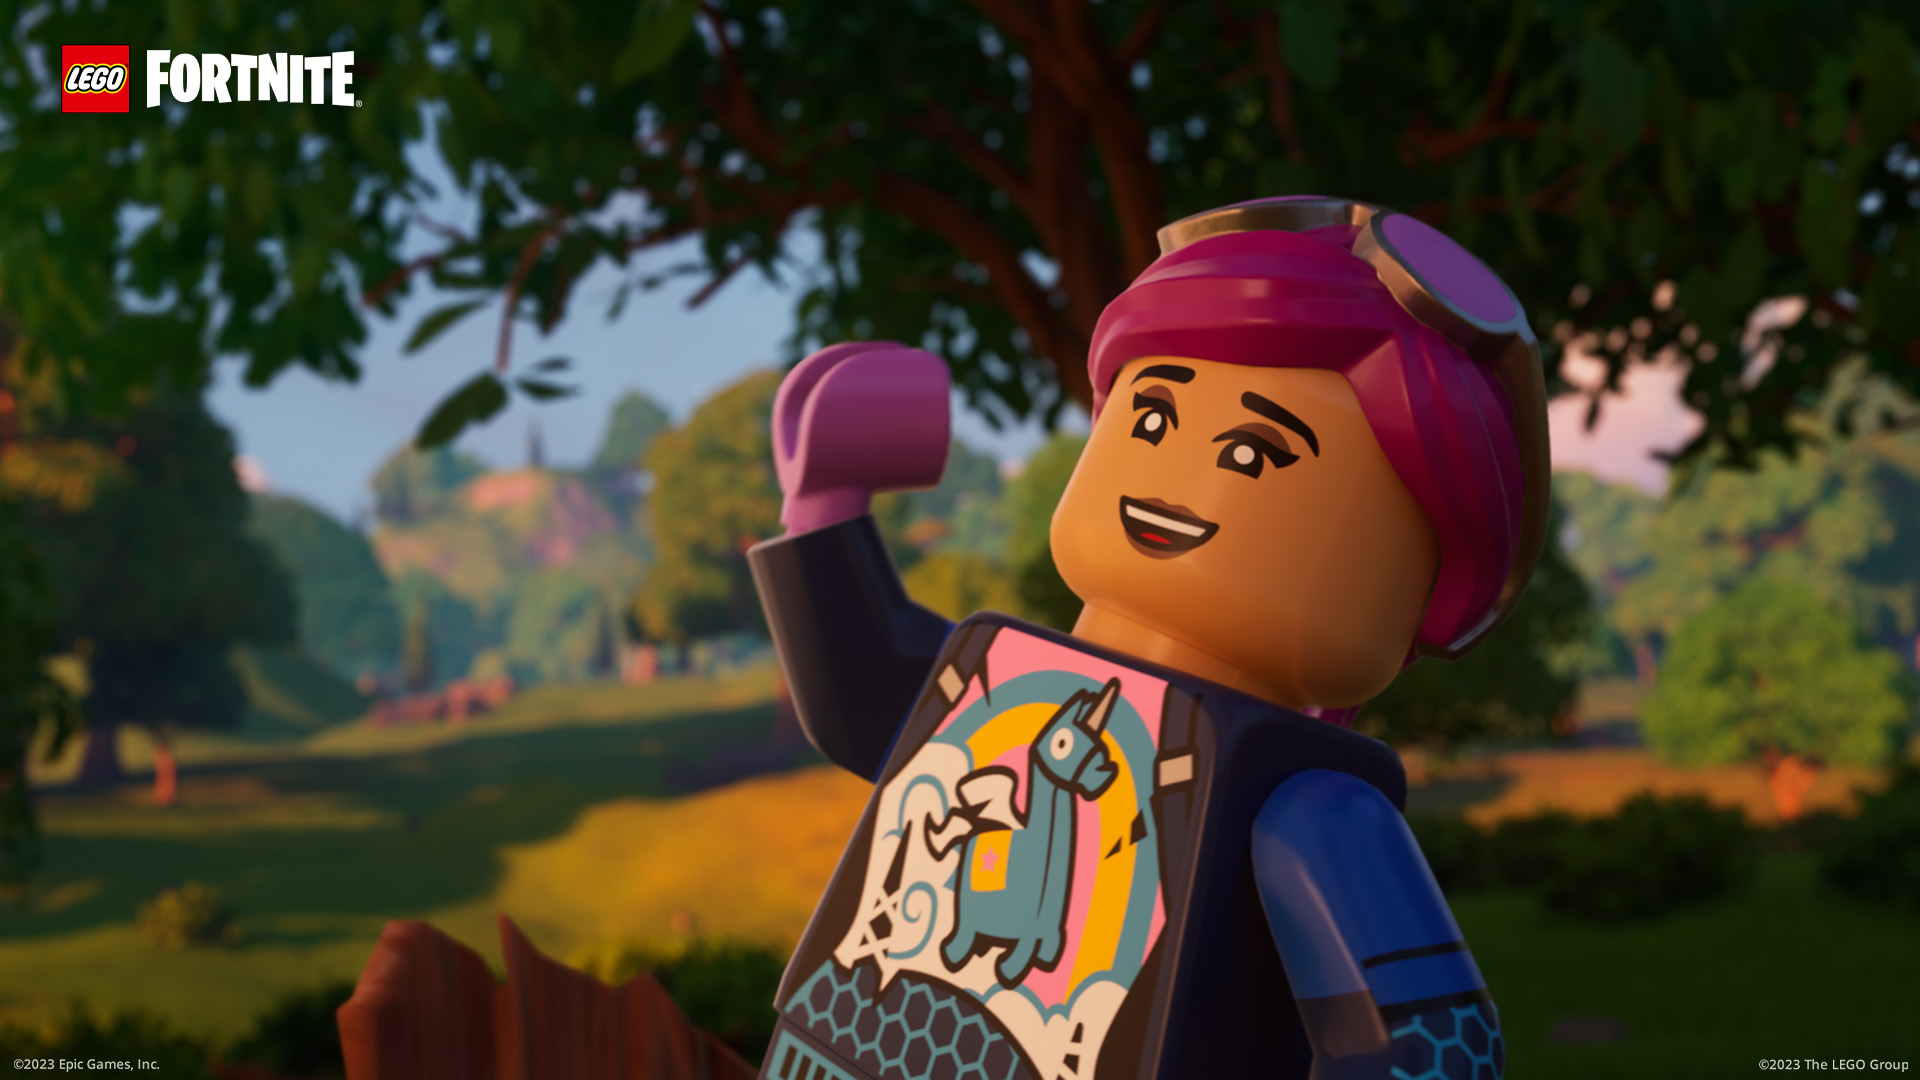 LEGO Fortnite player takes in-game Star Wars content to a whole new level